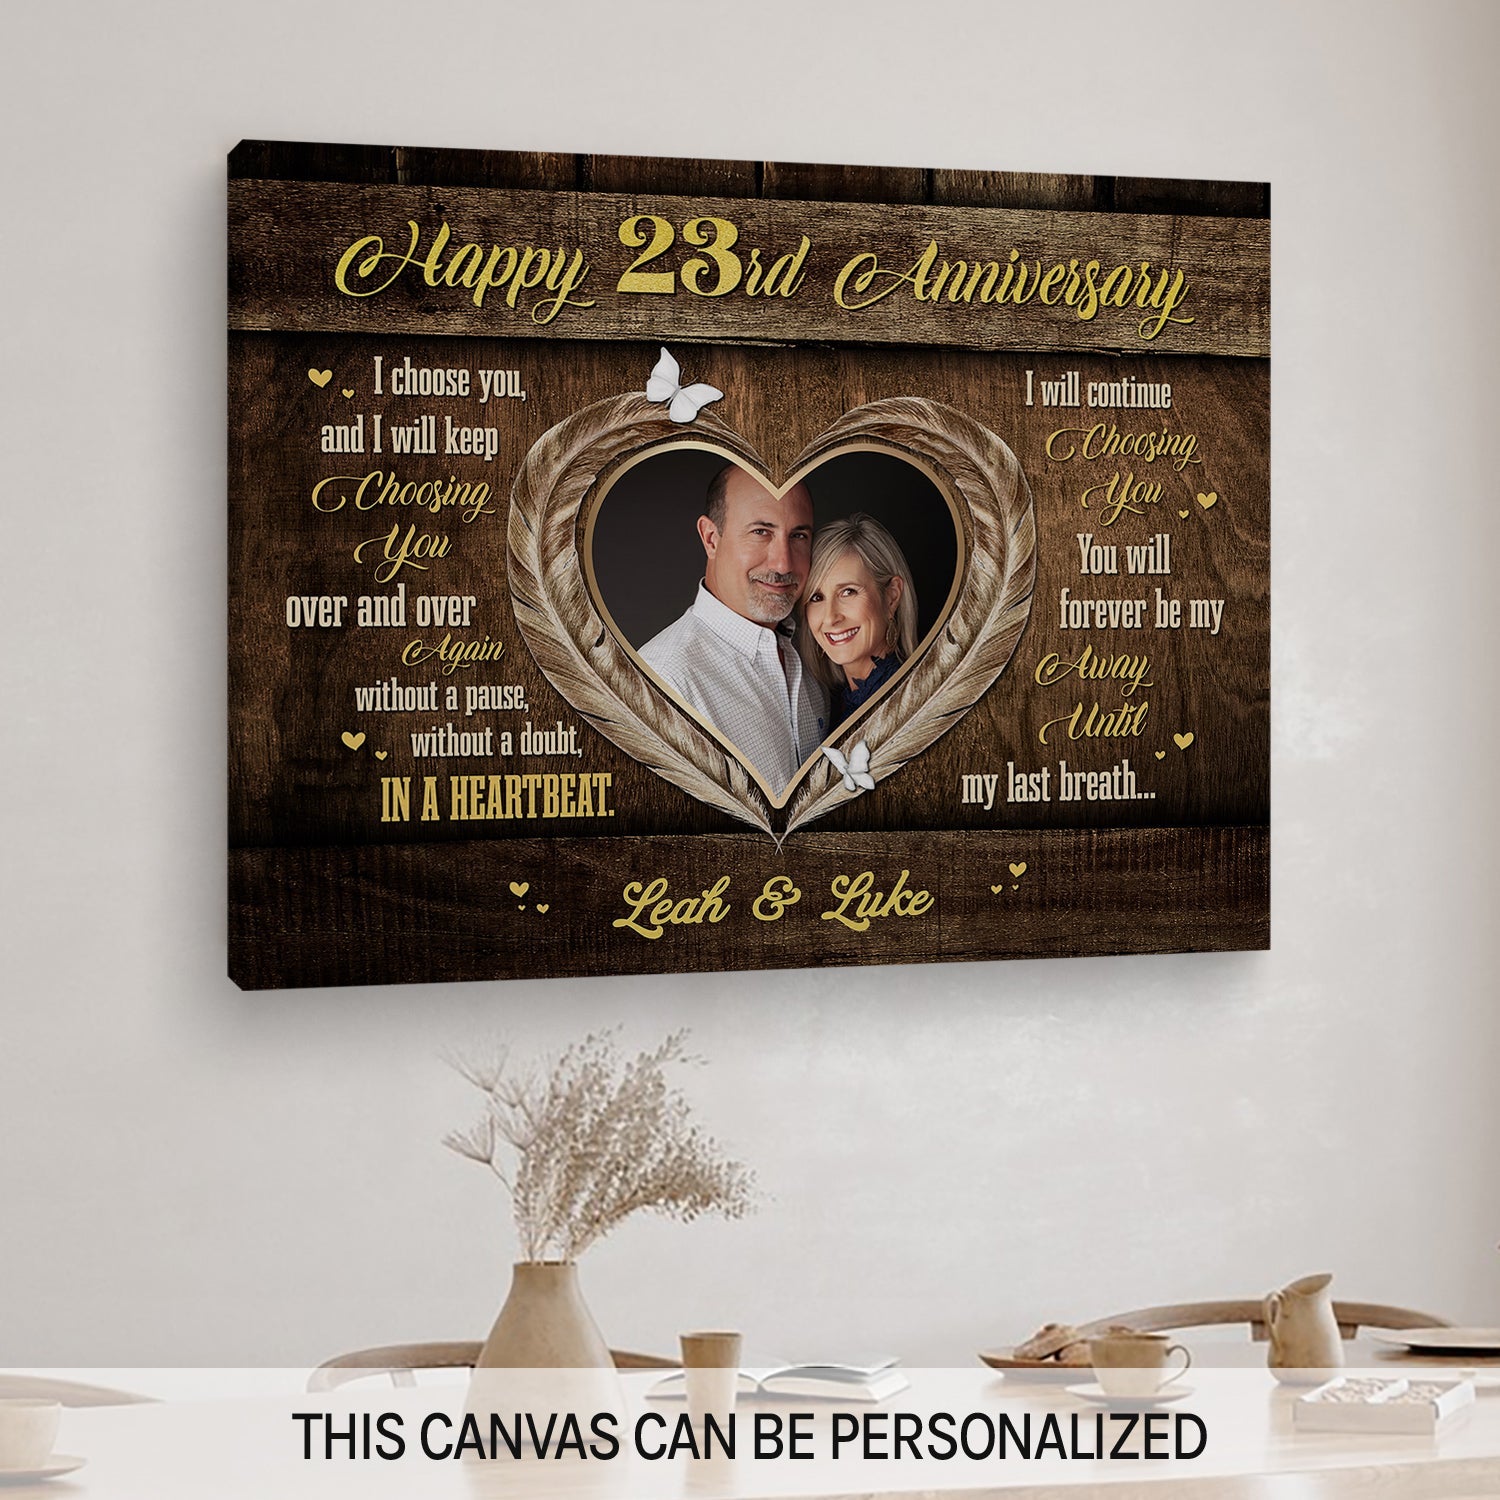 Happy 23rd Anniversary - Personalized 23 Year Anniversary gift For Husband or Wife - Custom Canvas Print - MyMindfulGifts